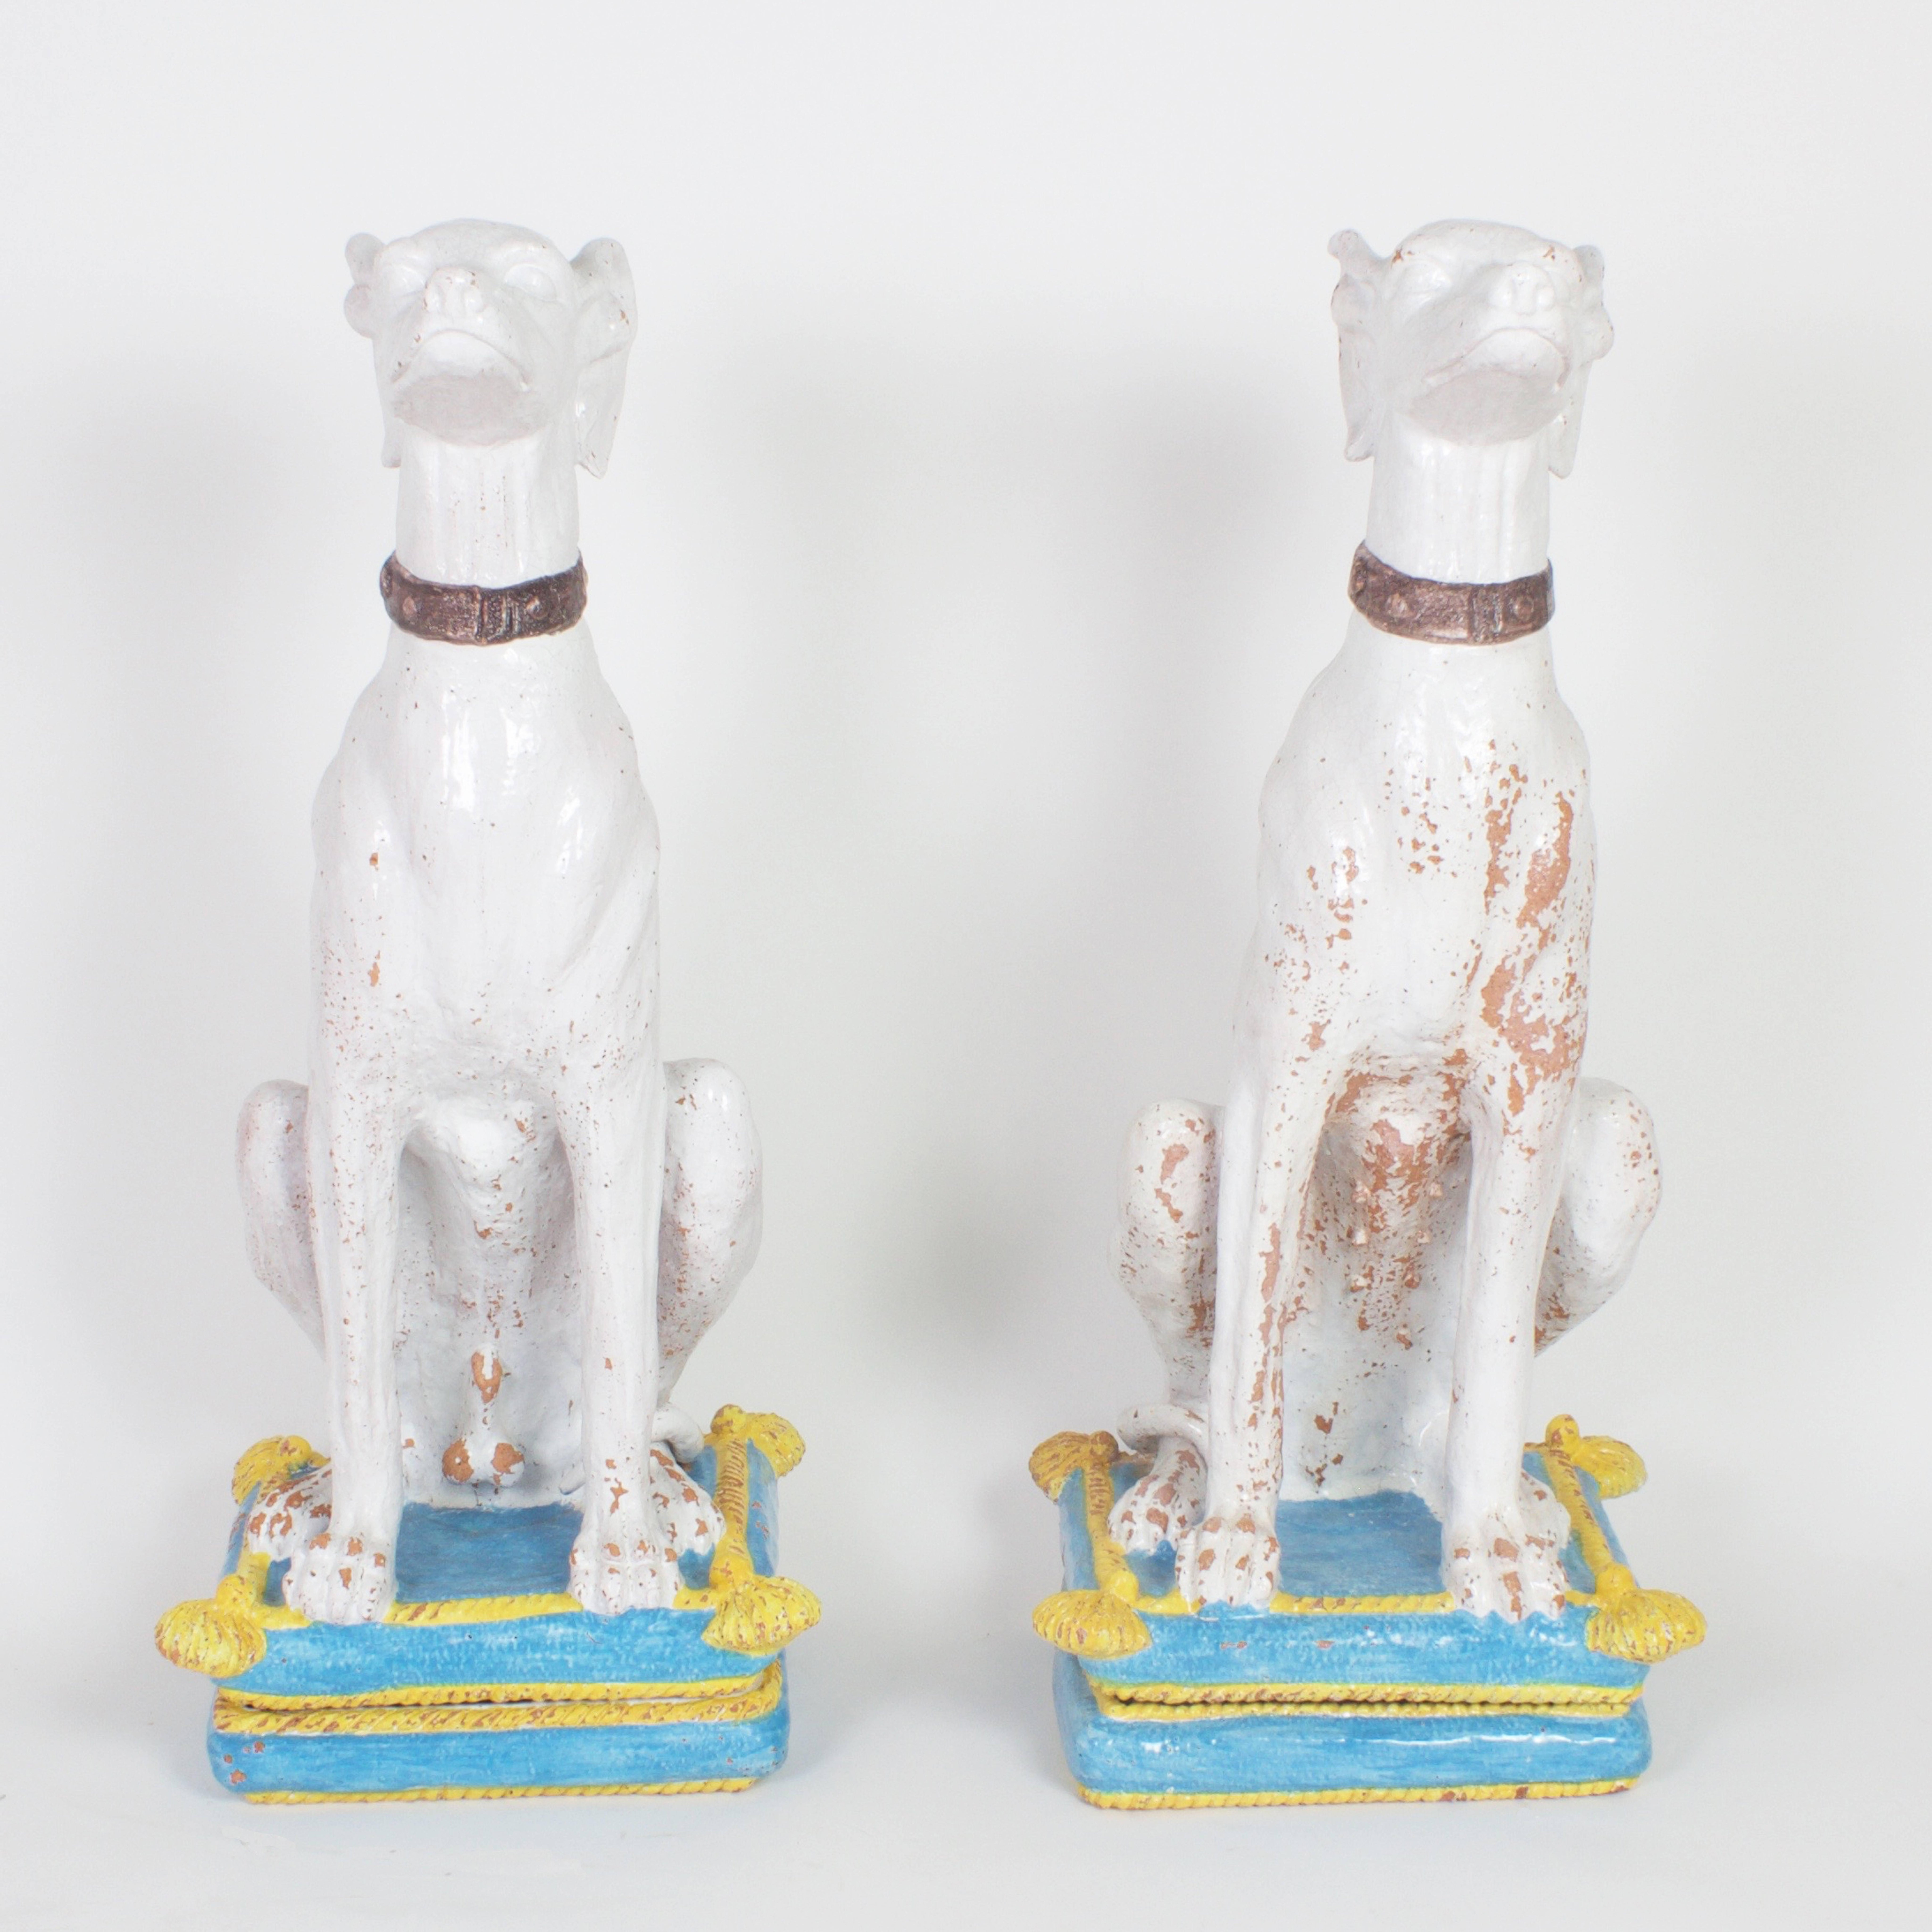 Larger than lifesize pair of Italian terra cotta greyhounds with an old world, time worn glaze. This pair of handsome dogs are male and female, both displaying majestic, well-bred postures and sitting on blue and yellow tasseled cushions. These are